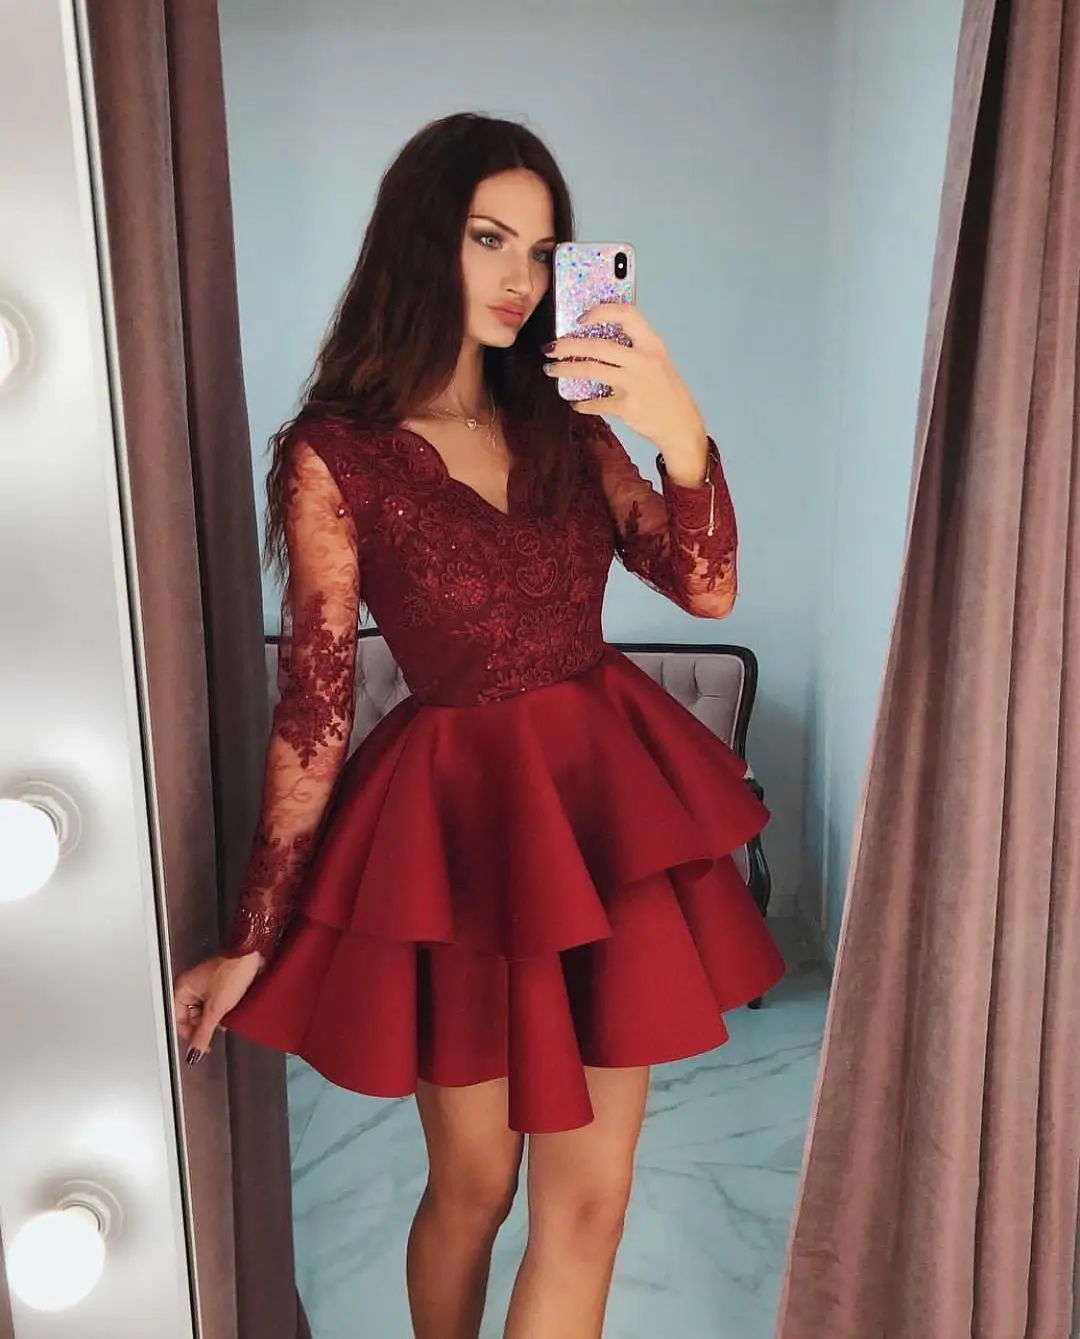 

Bespoke Occasion Dresses Burgundy Embroidery Full Sleeves Deep V-Neck Pleat Knee-Length A-Line Women Formal Evening Gown H785